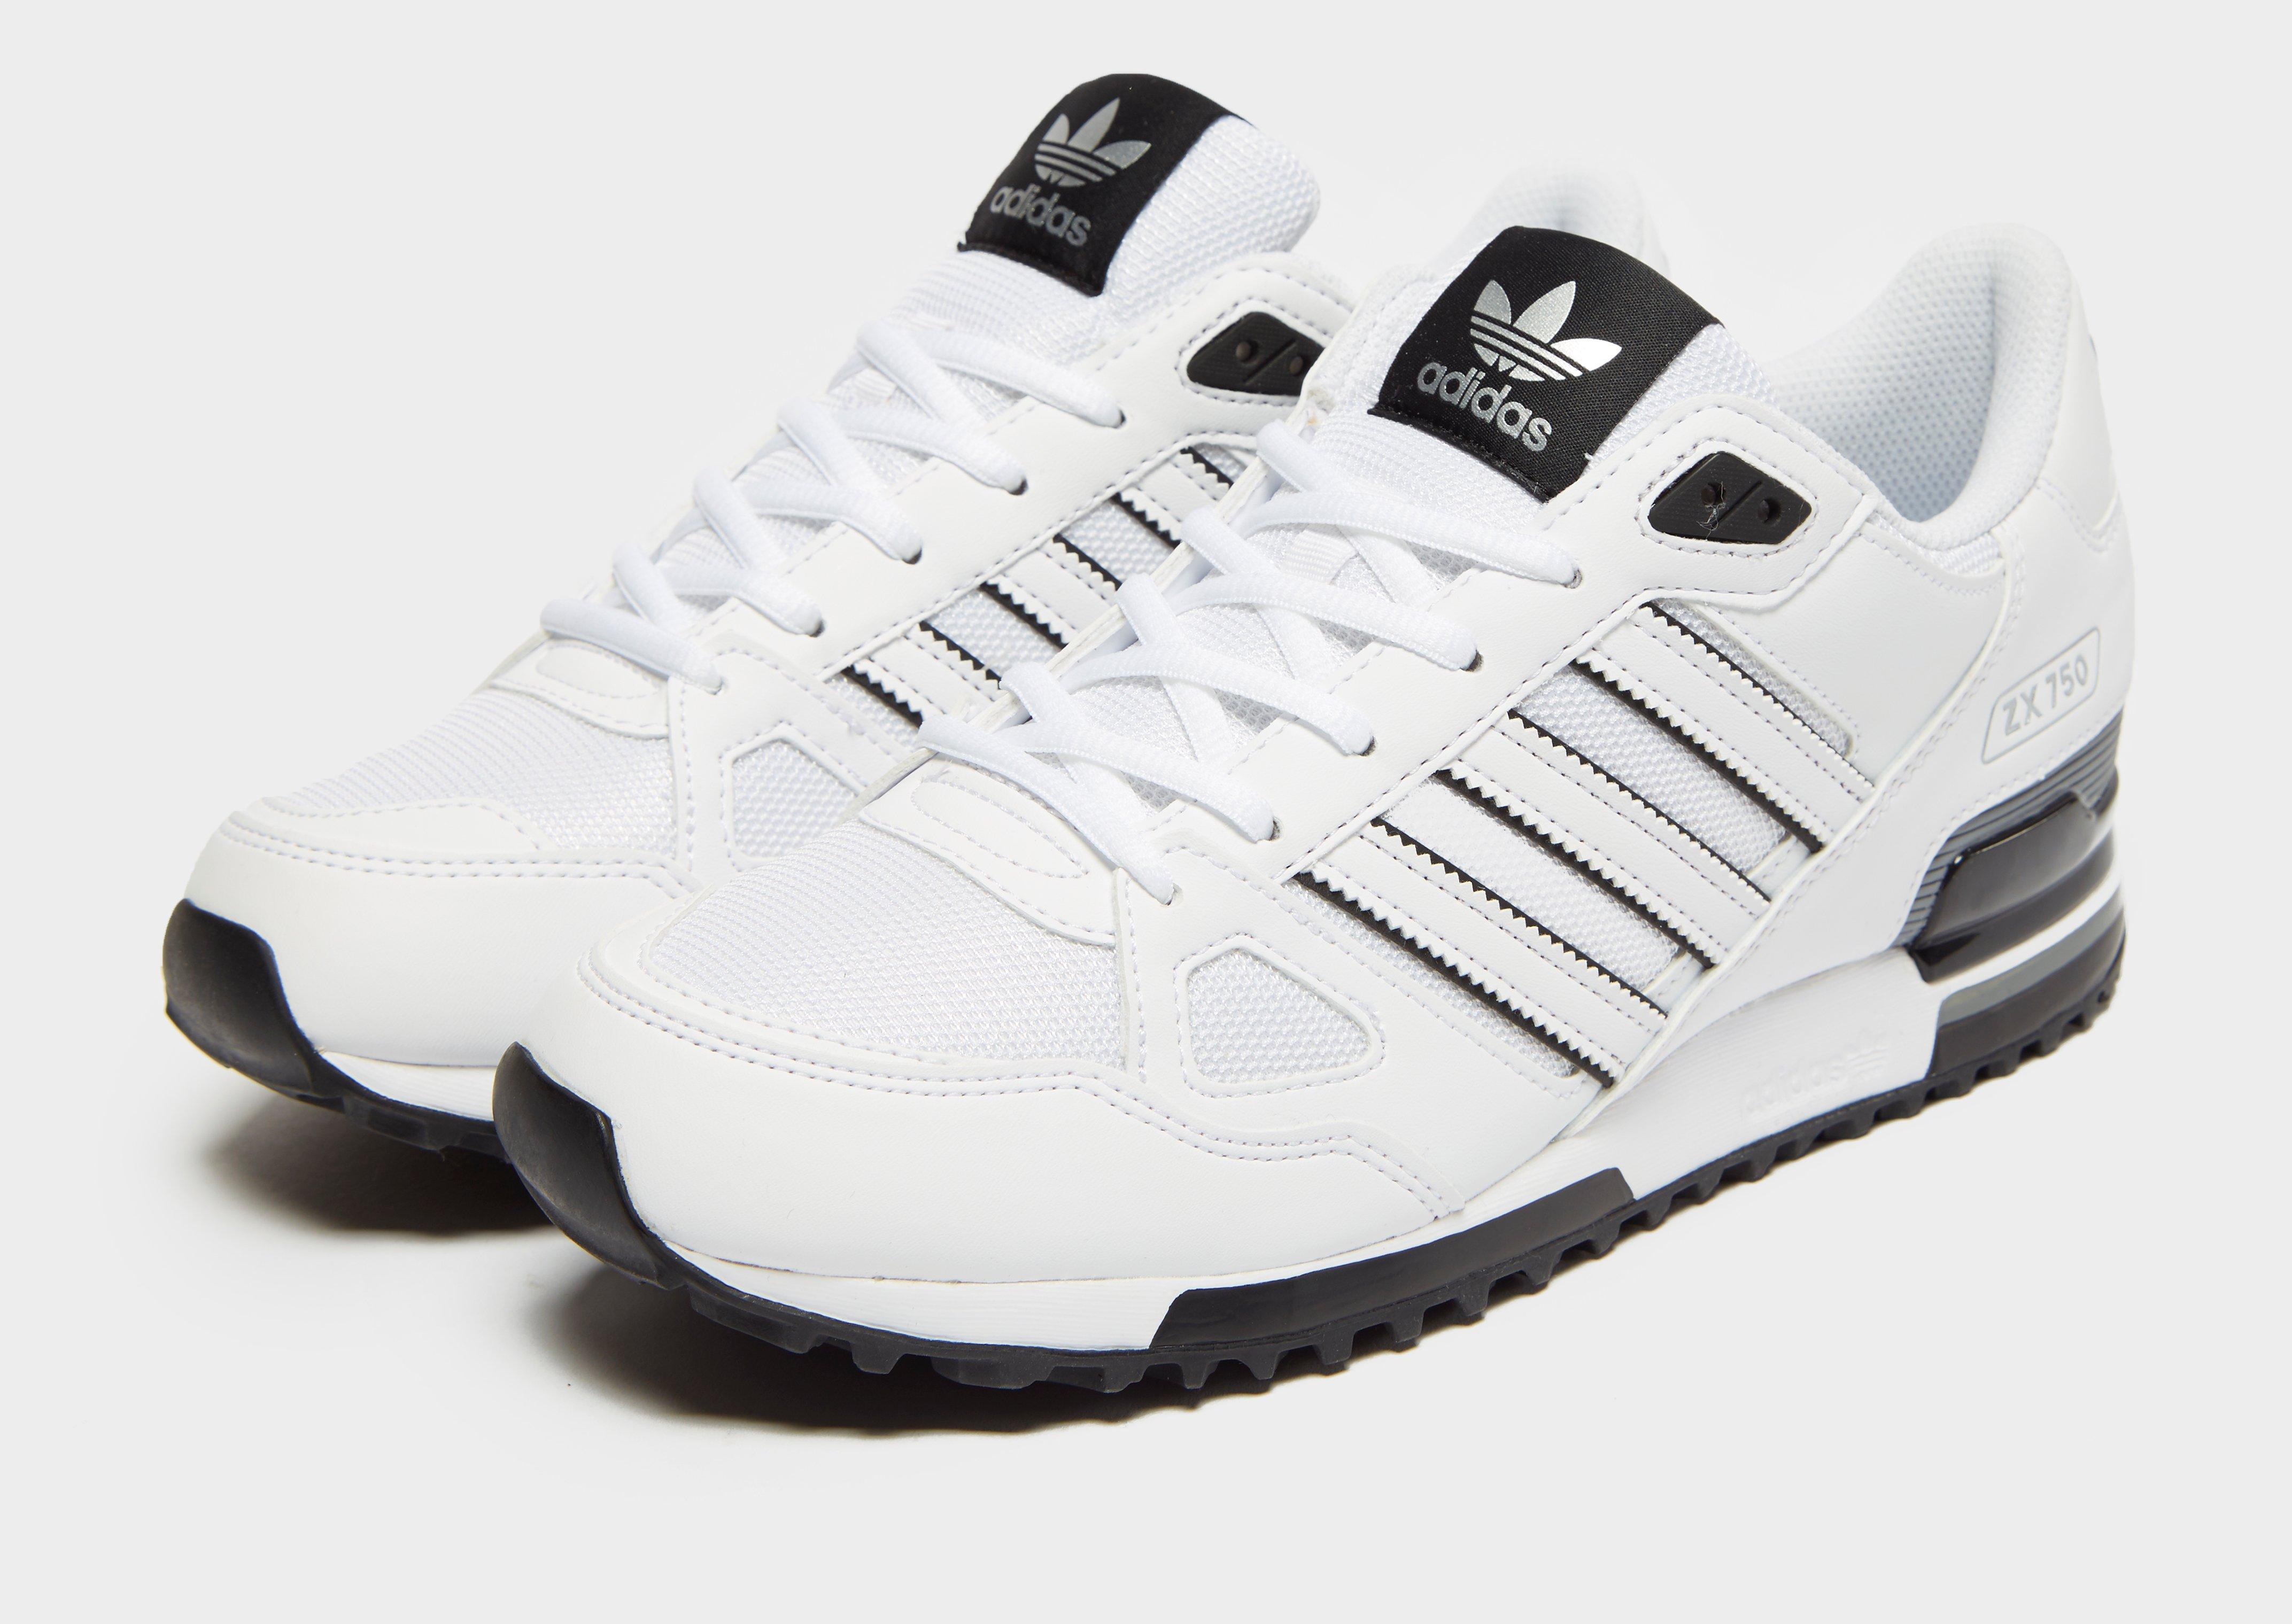 adidas zx 750 all white